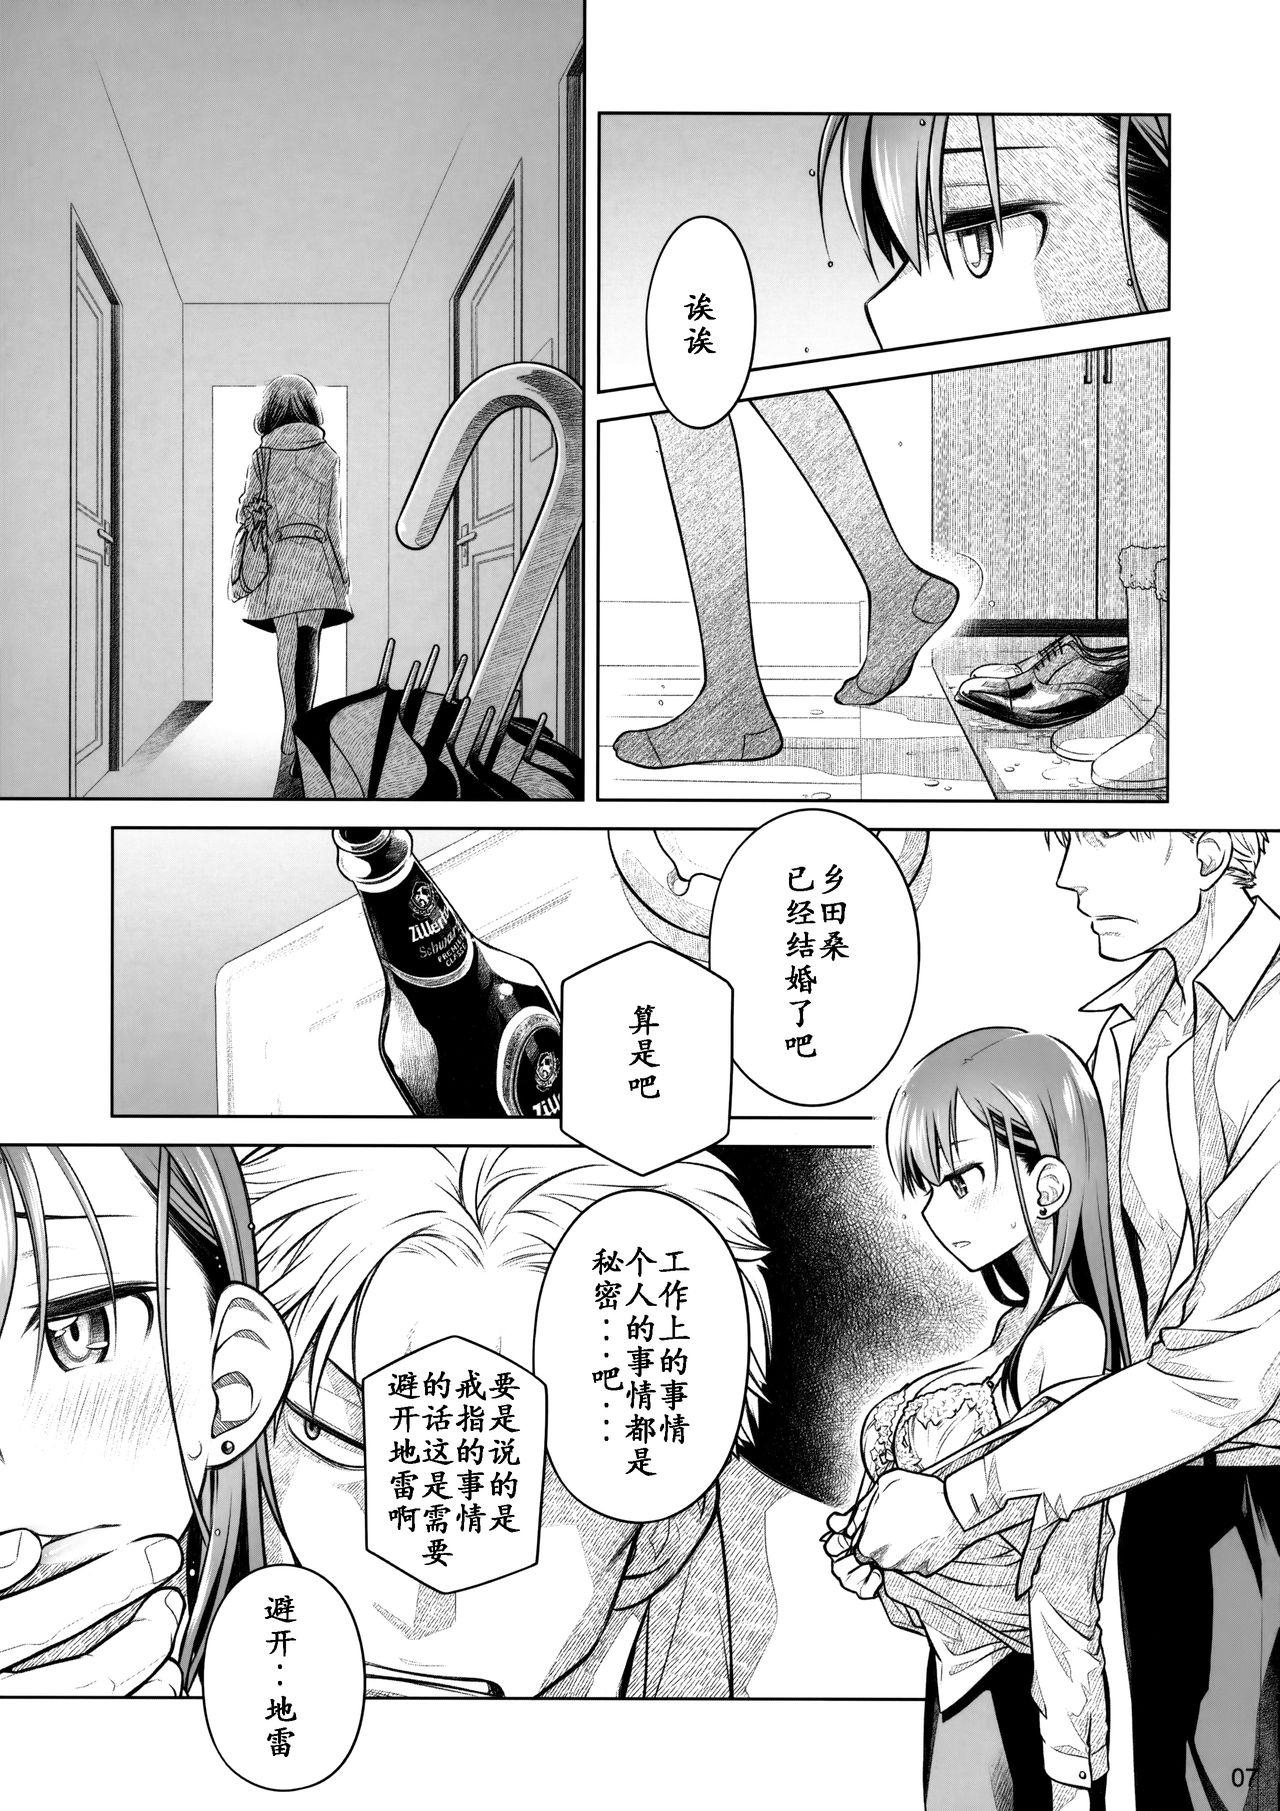 Heels Stay by Me Zenjitsutan Fragile S - Stay by me "Prequel" Pay - Page 6